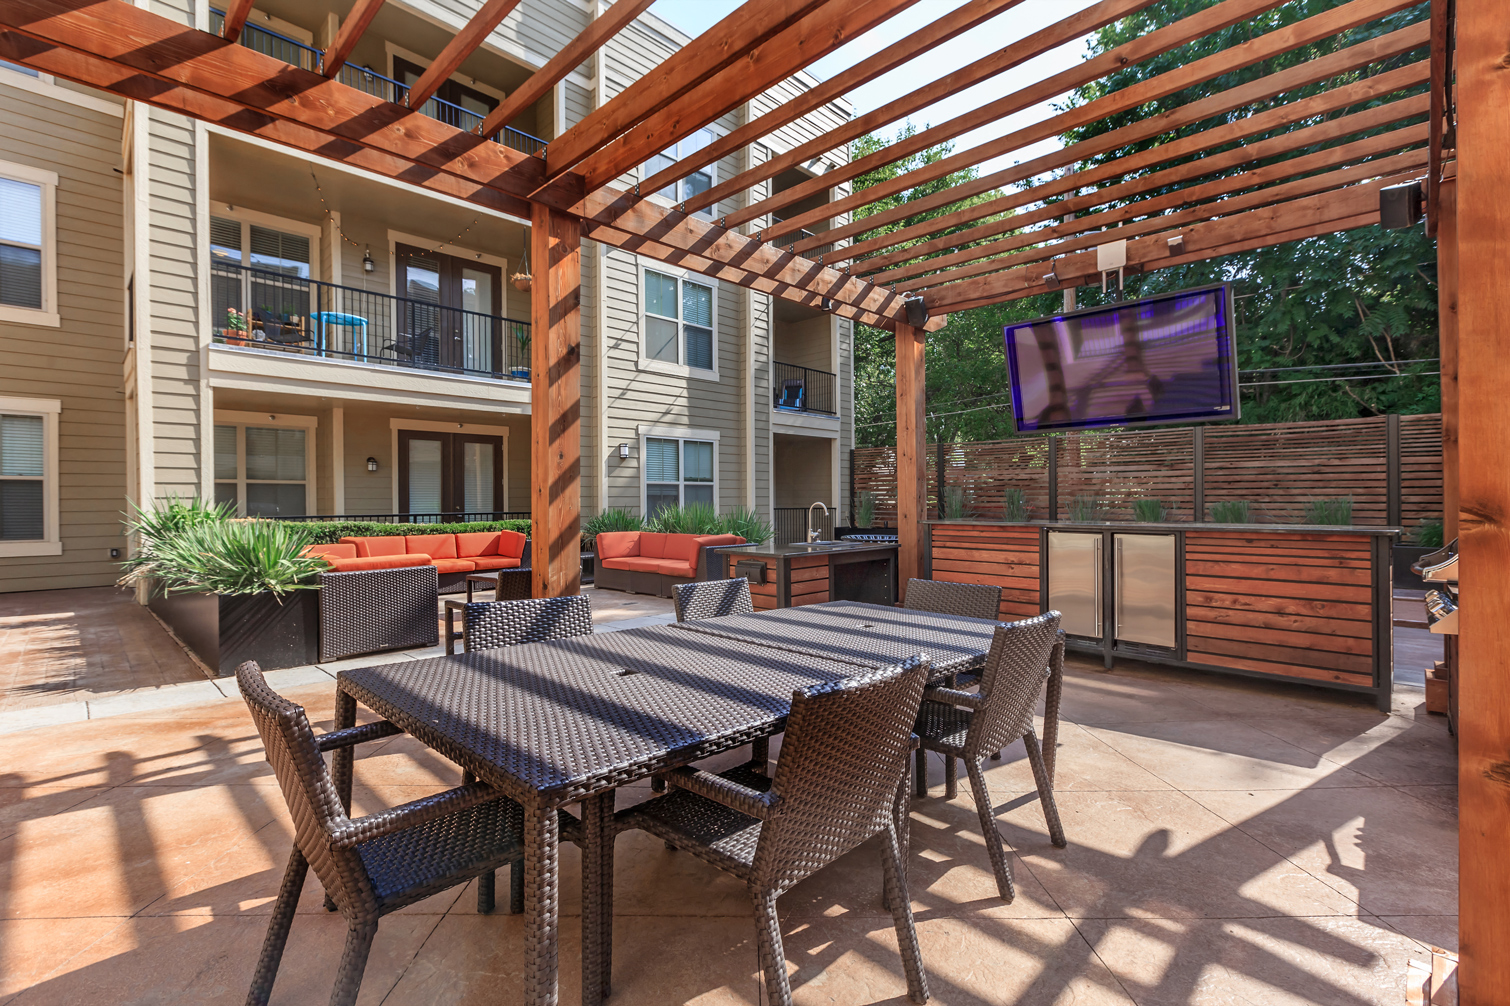 Outdoor seating at West 39th Street Apartments, Kansas City